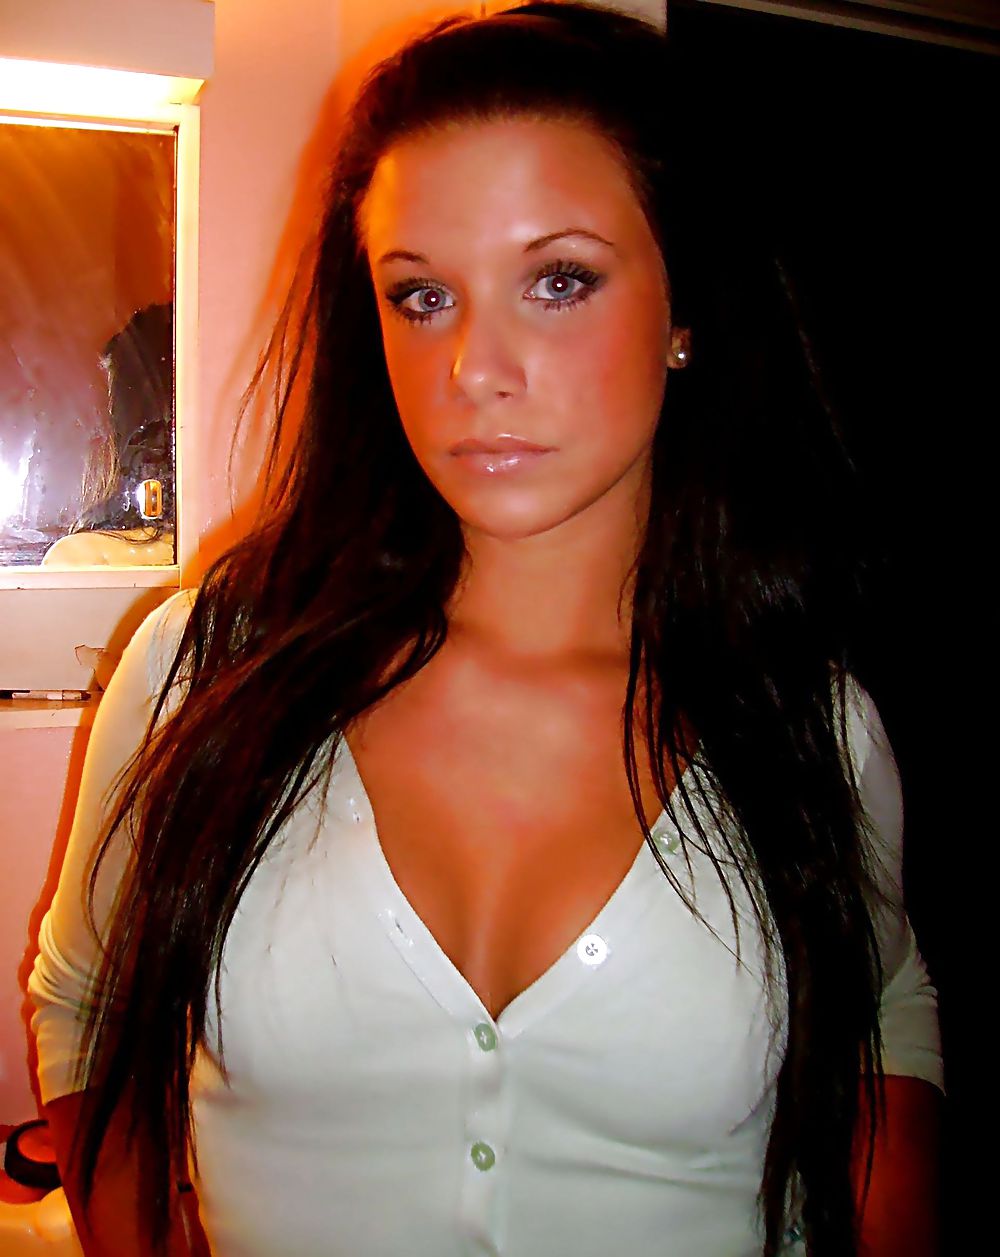 Another hot girl with blue eyes #21442366